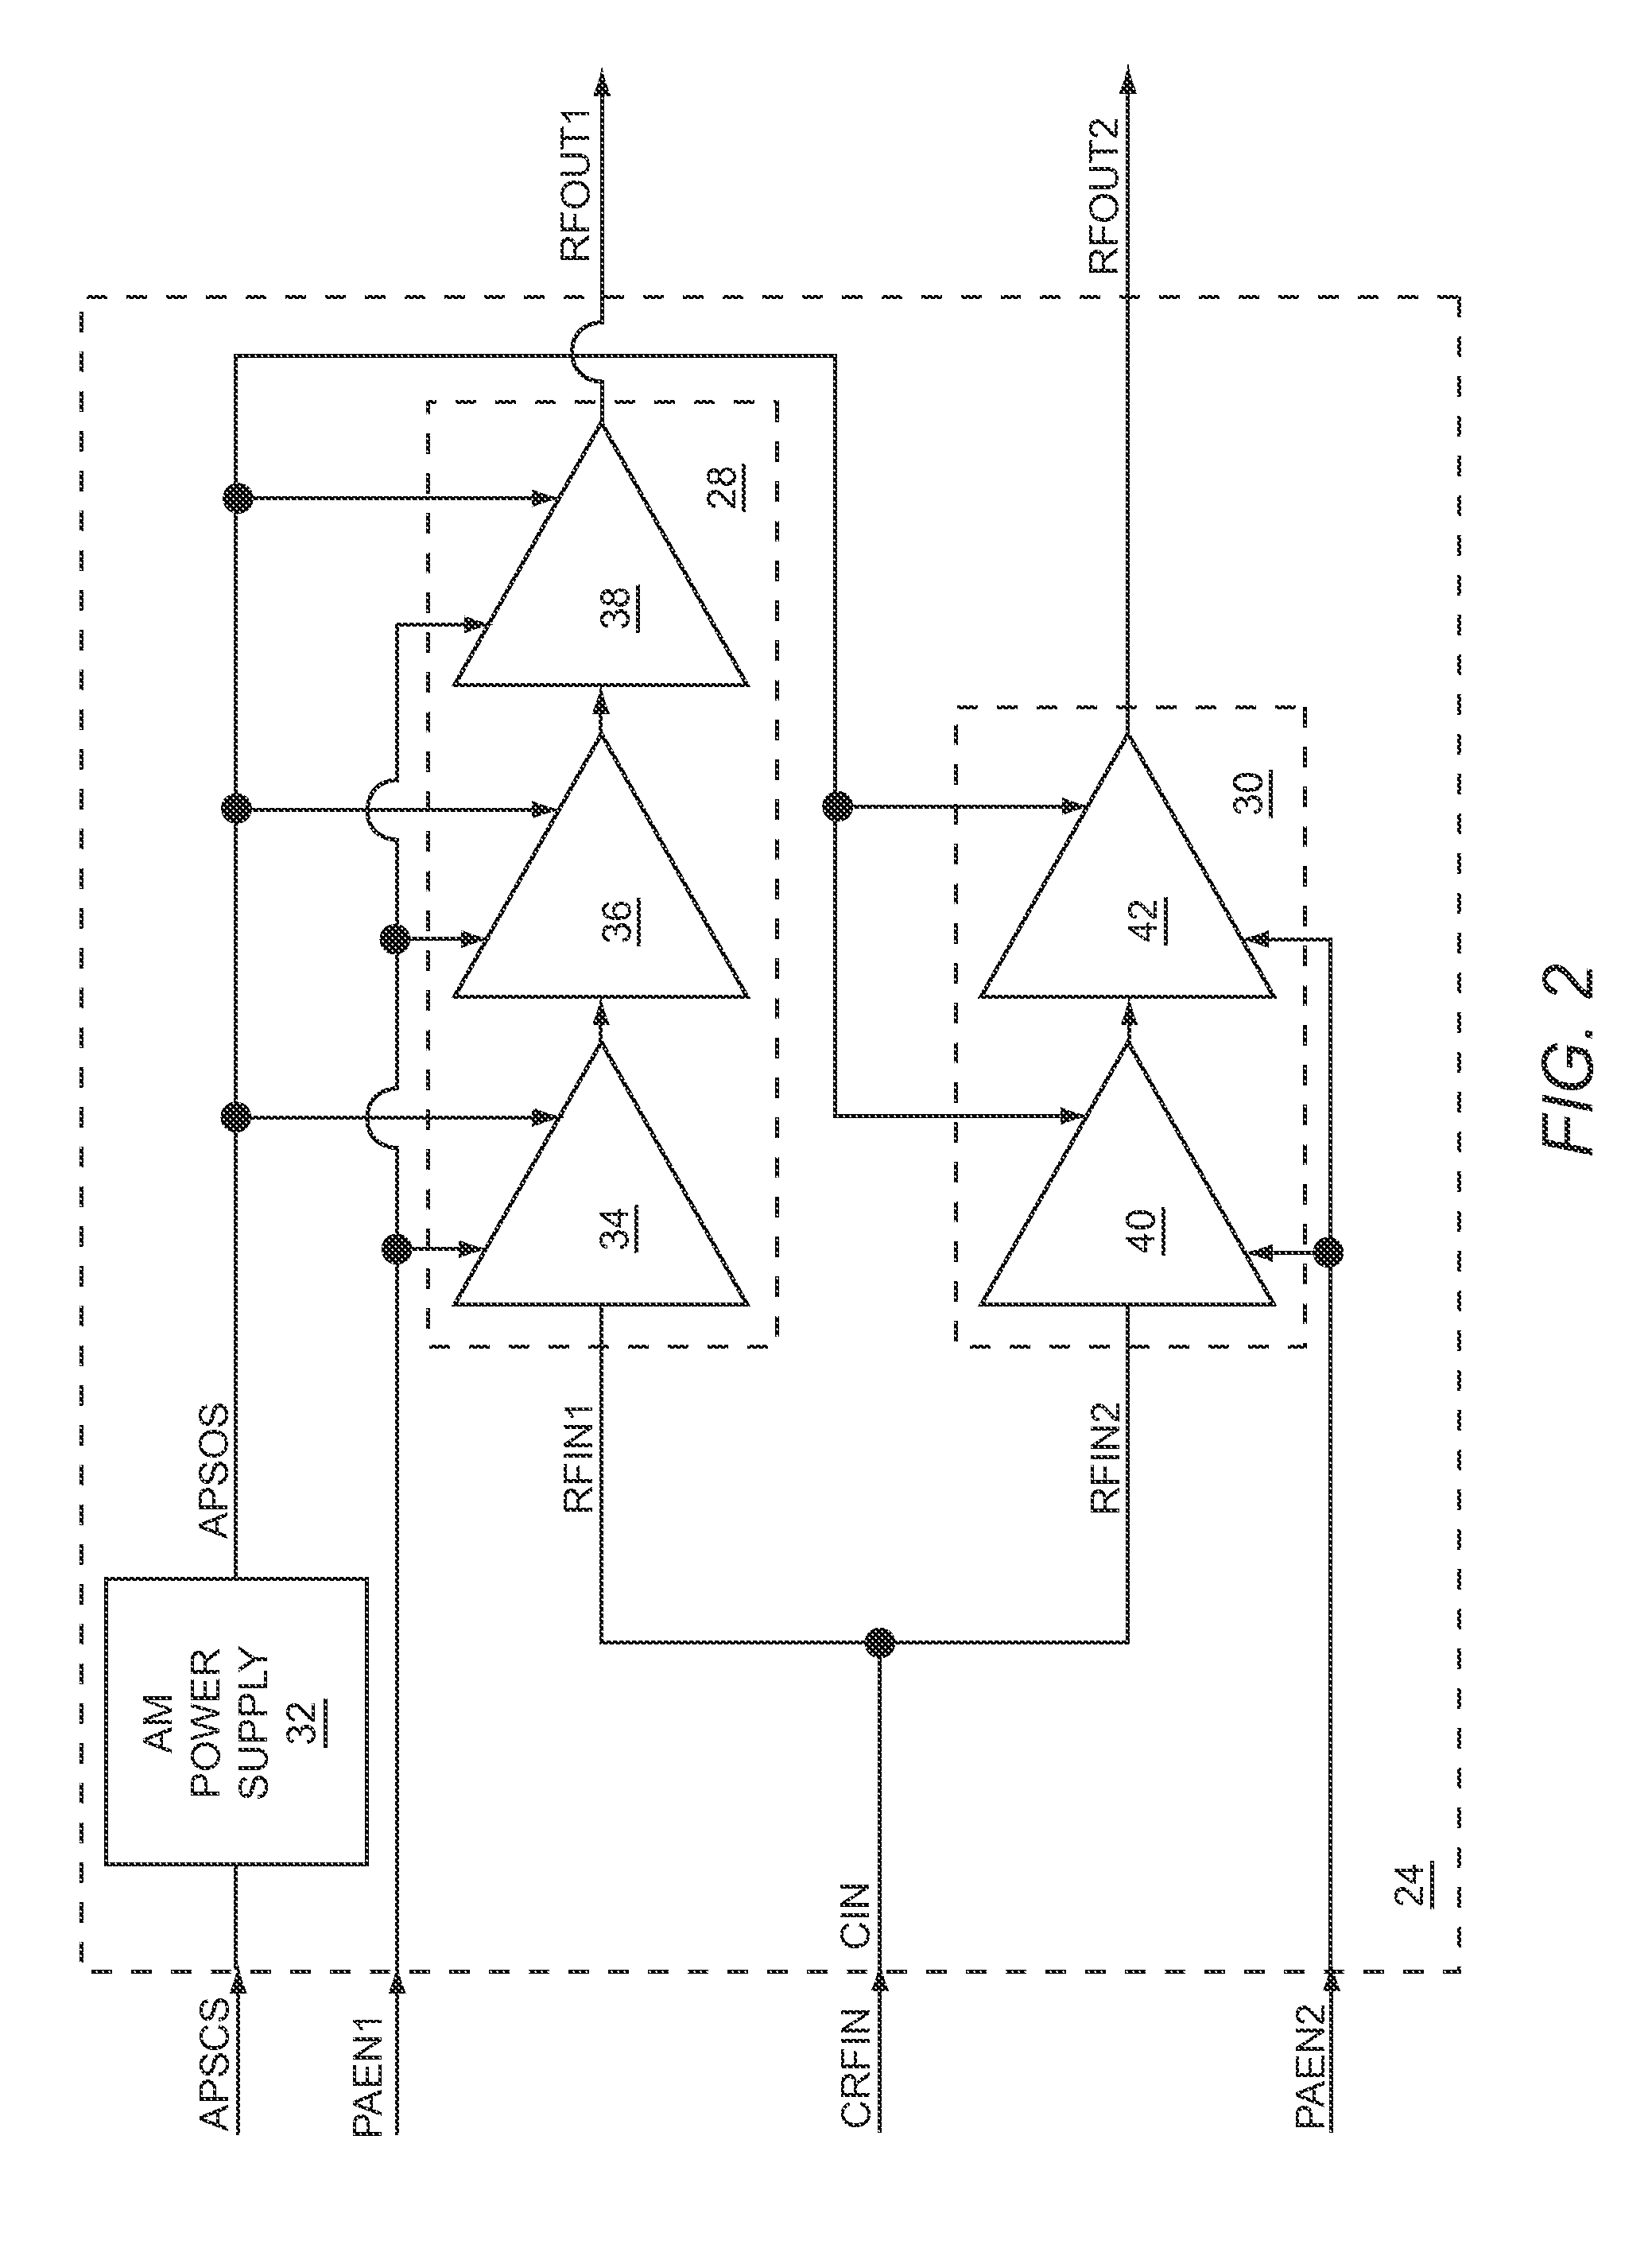 Dual path multi-mode power amplifier routing architecture